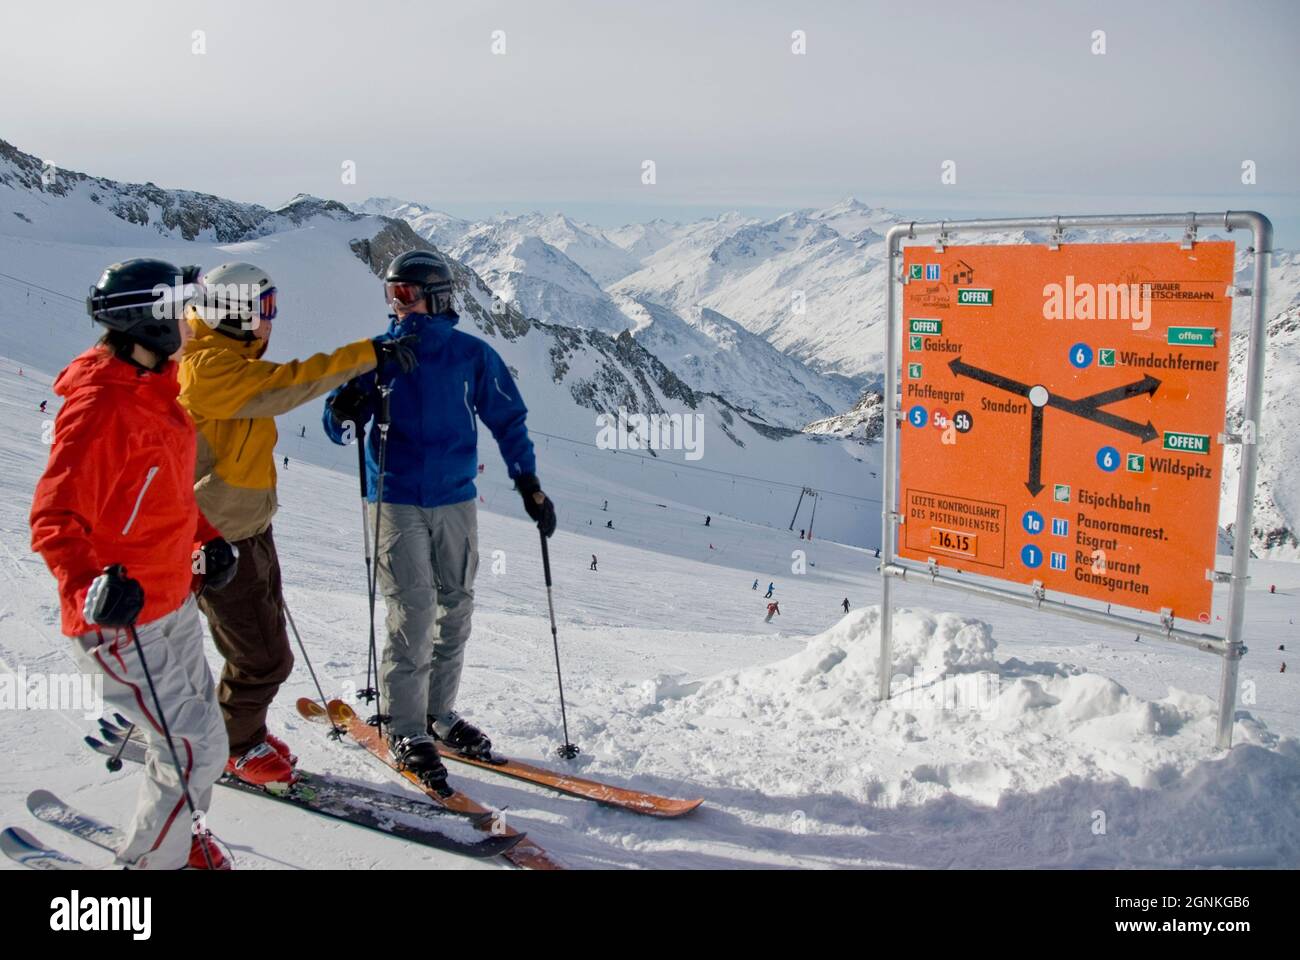 A group of skiers on the slopes of Stubai glacier Stock Photo